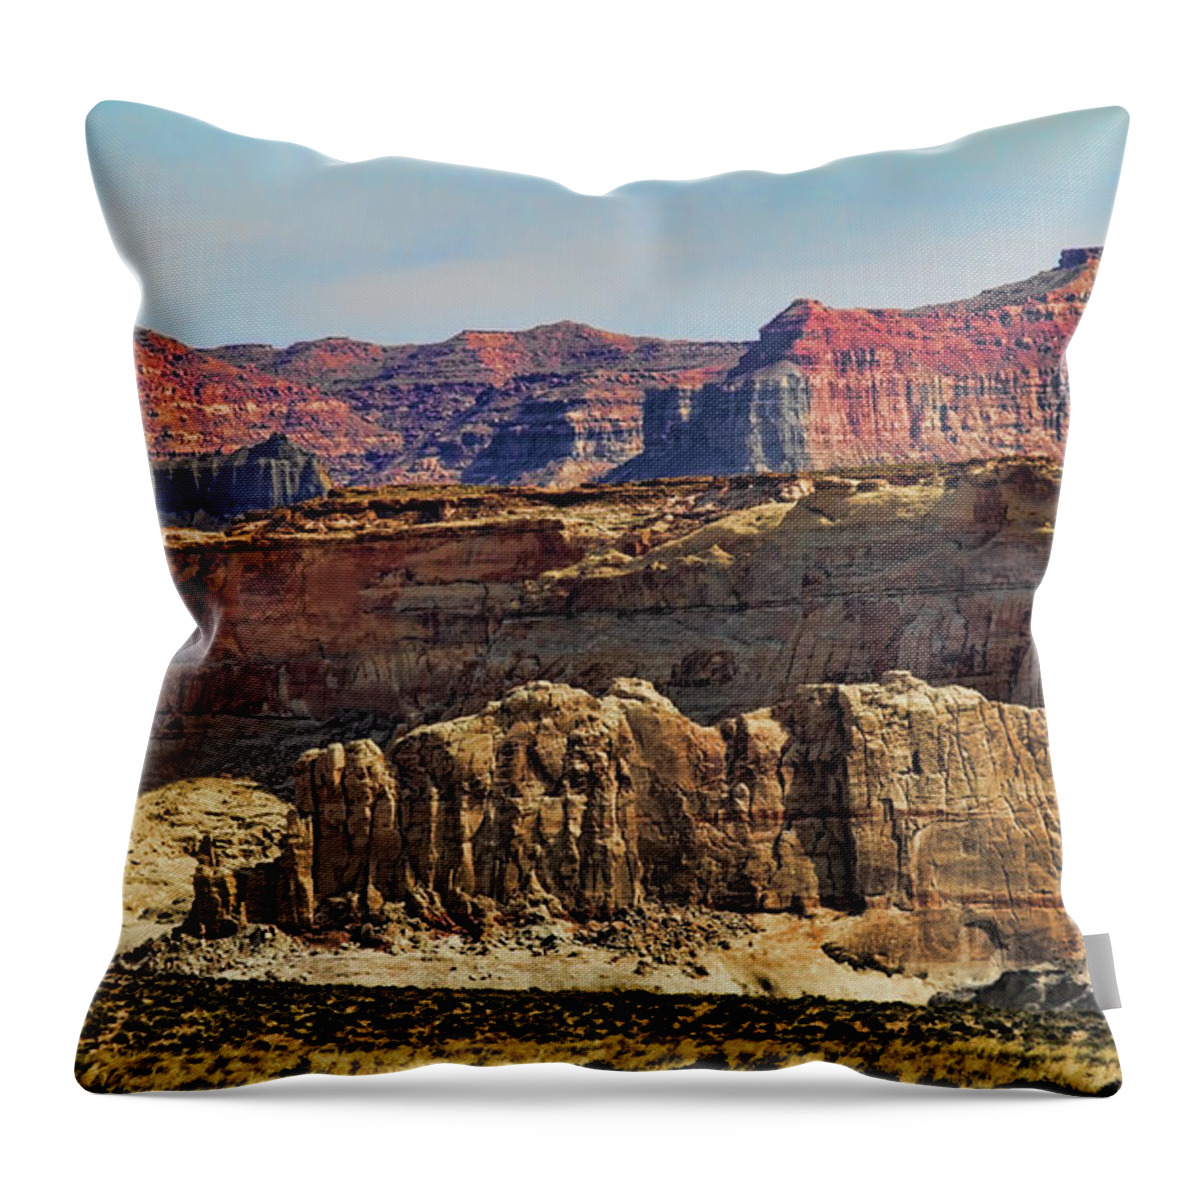  Arizona Throw Pillow featuring the photograph Nature Best Arizona Landscape by Chuck Kuhn